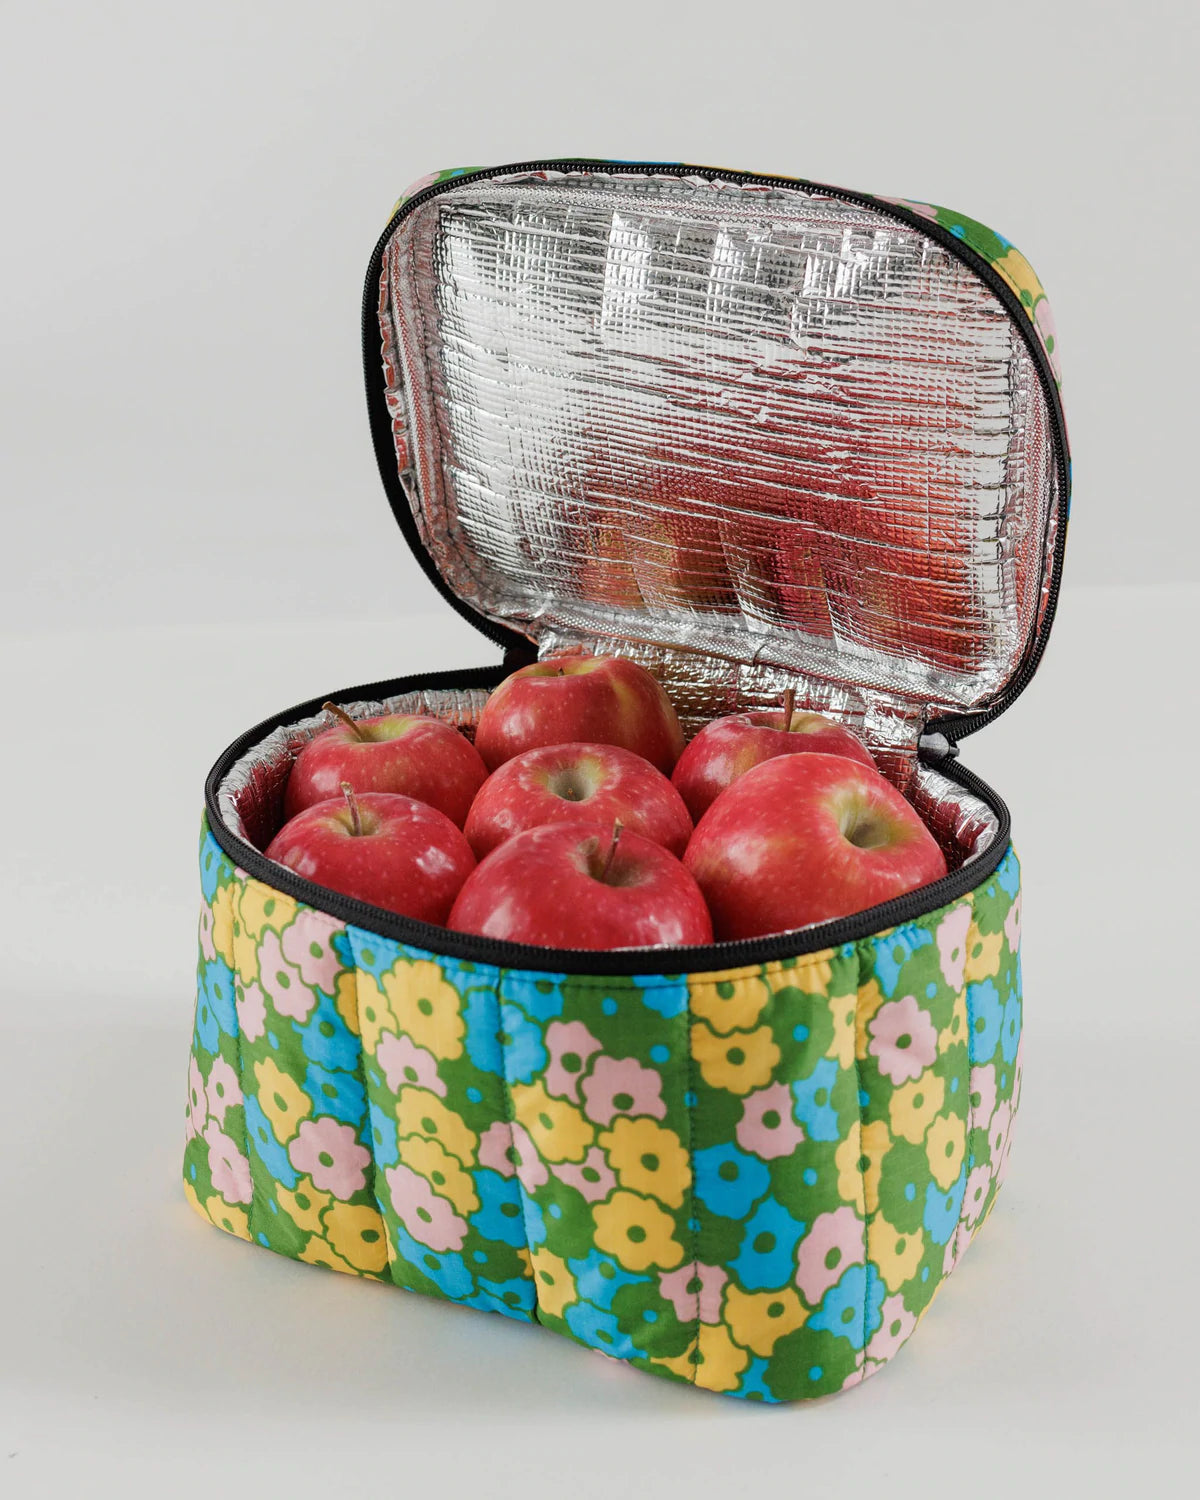 The Flowerbed Puffy Lunch Bag by Baggu